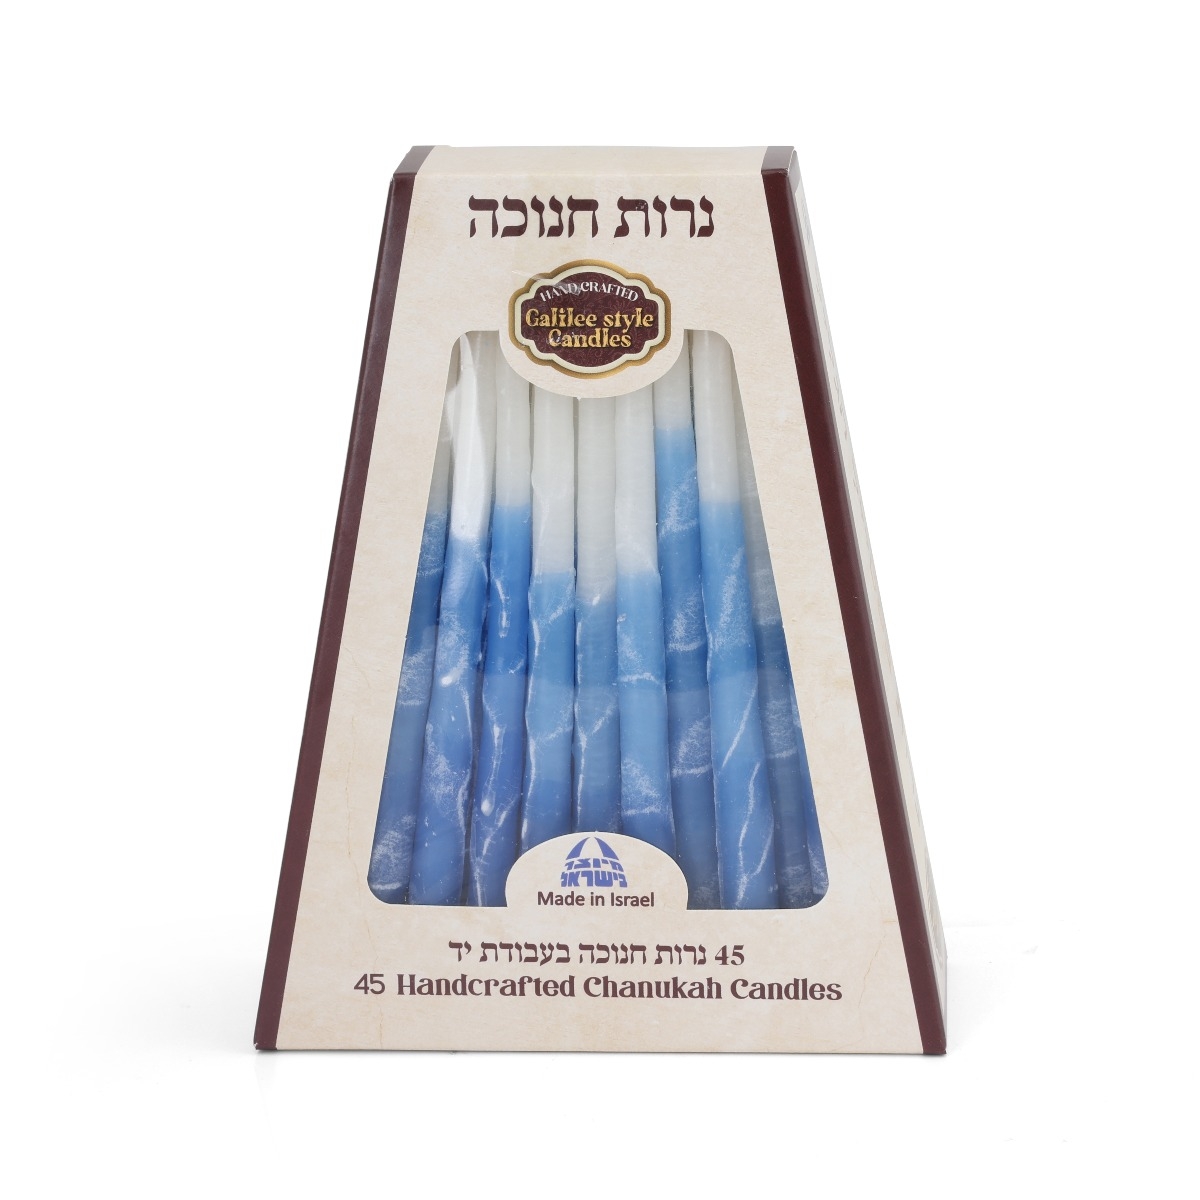 Luxury Handcrafted Hanukkah Candles - Blue and White - 1